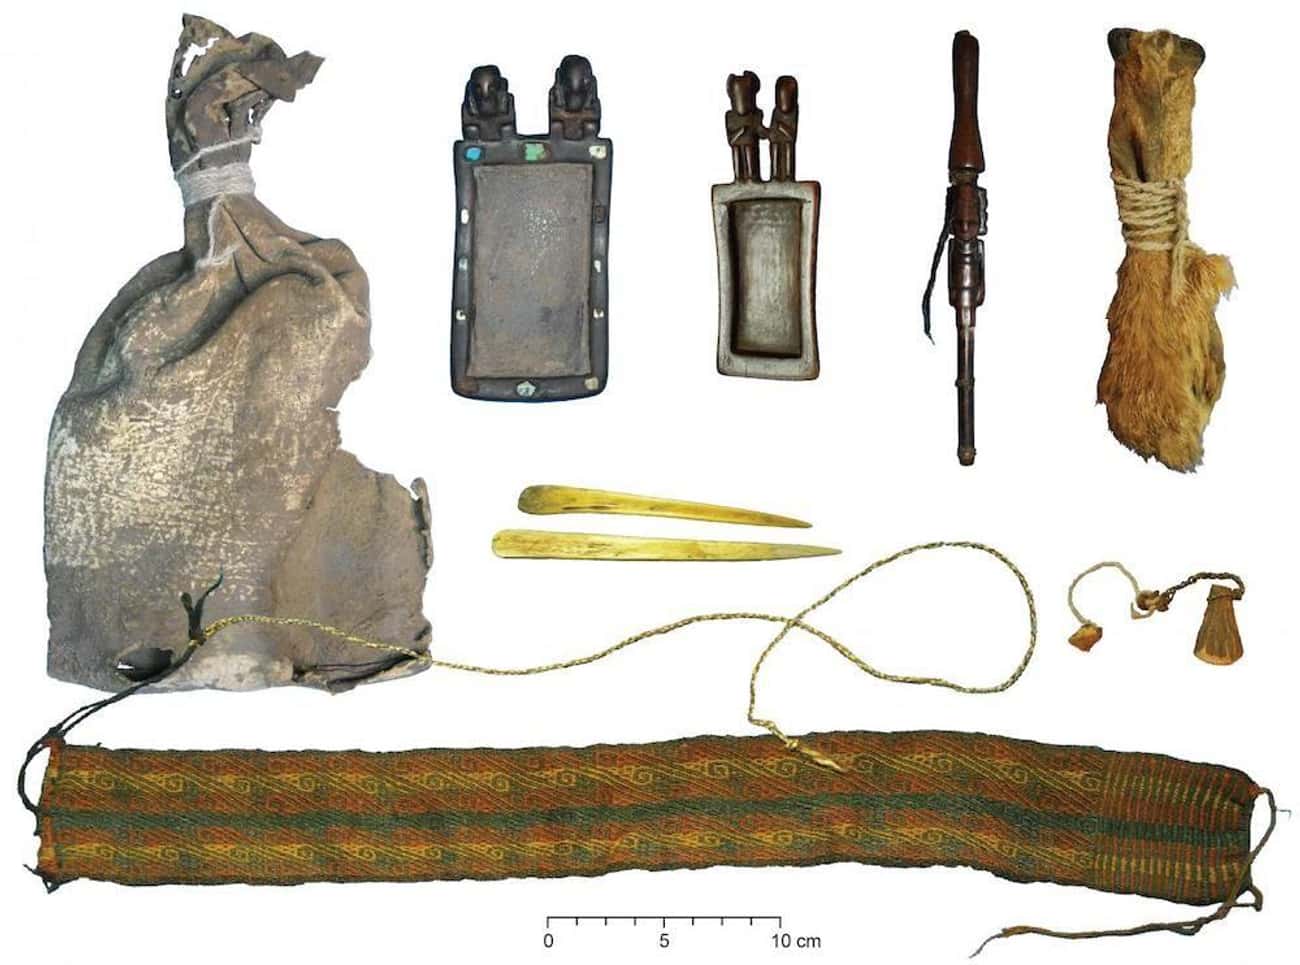 A 1,000-Year-Old Medicine Pouch Offers The Earliest Recipe For The Hallucinogenic Tea Ayahuasca